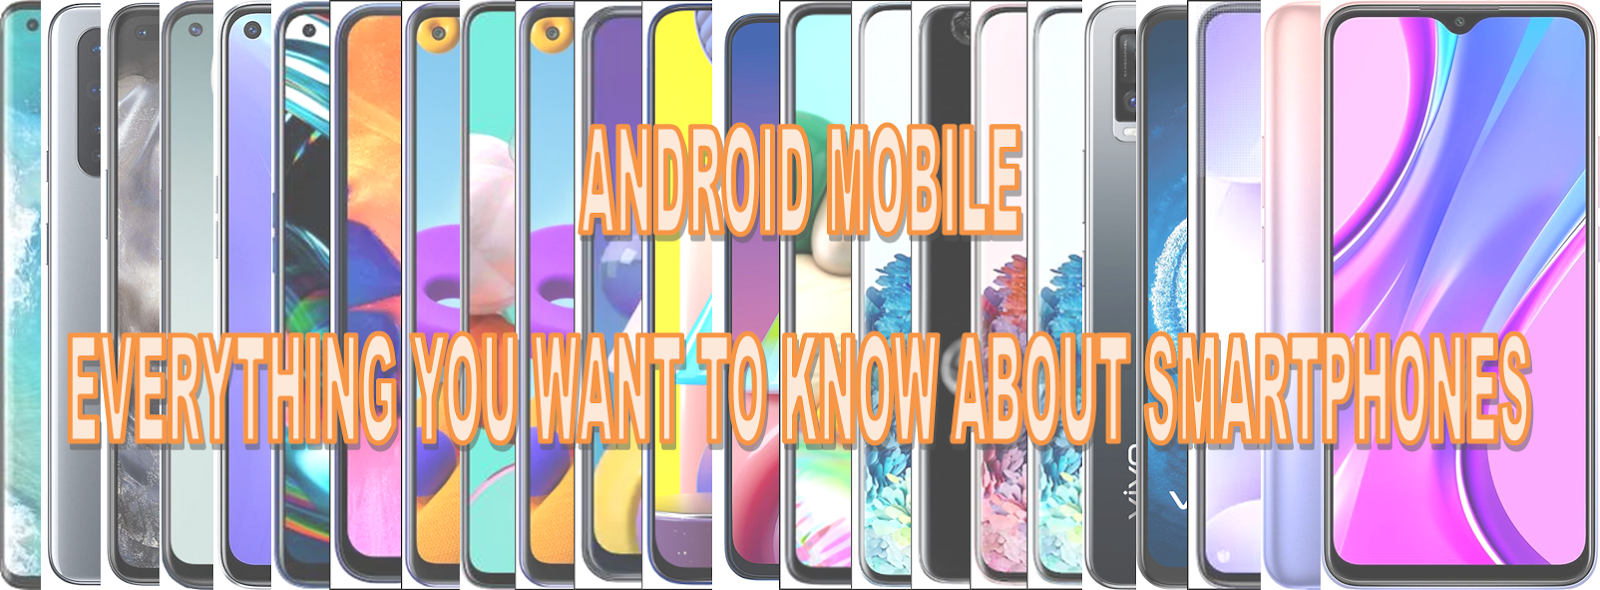 Android Mobile Operating System – Everything you want to know